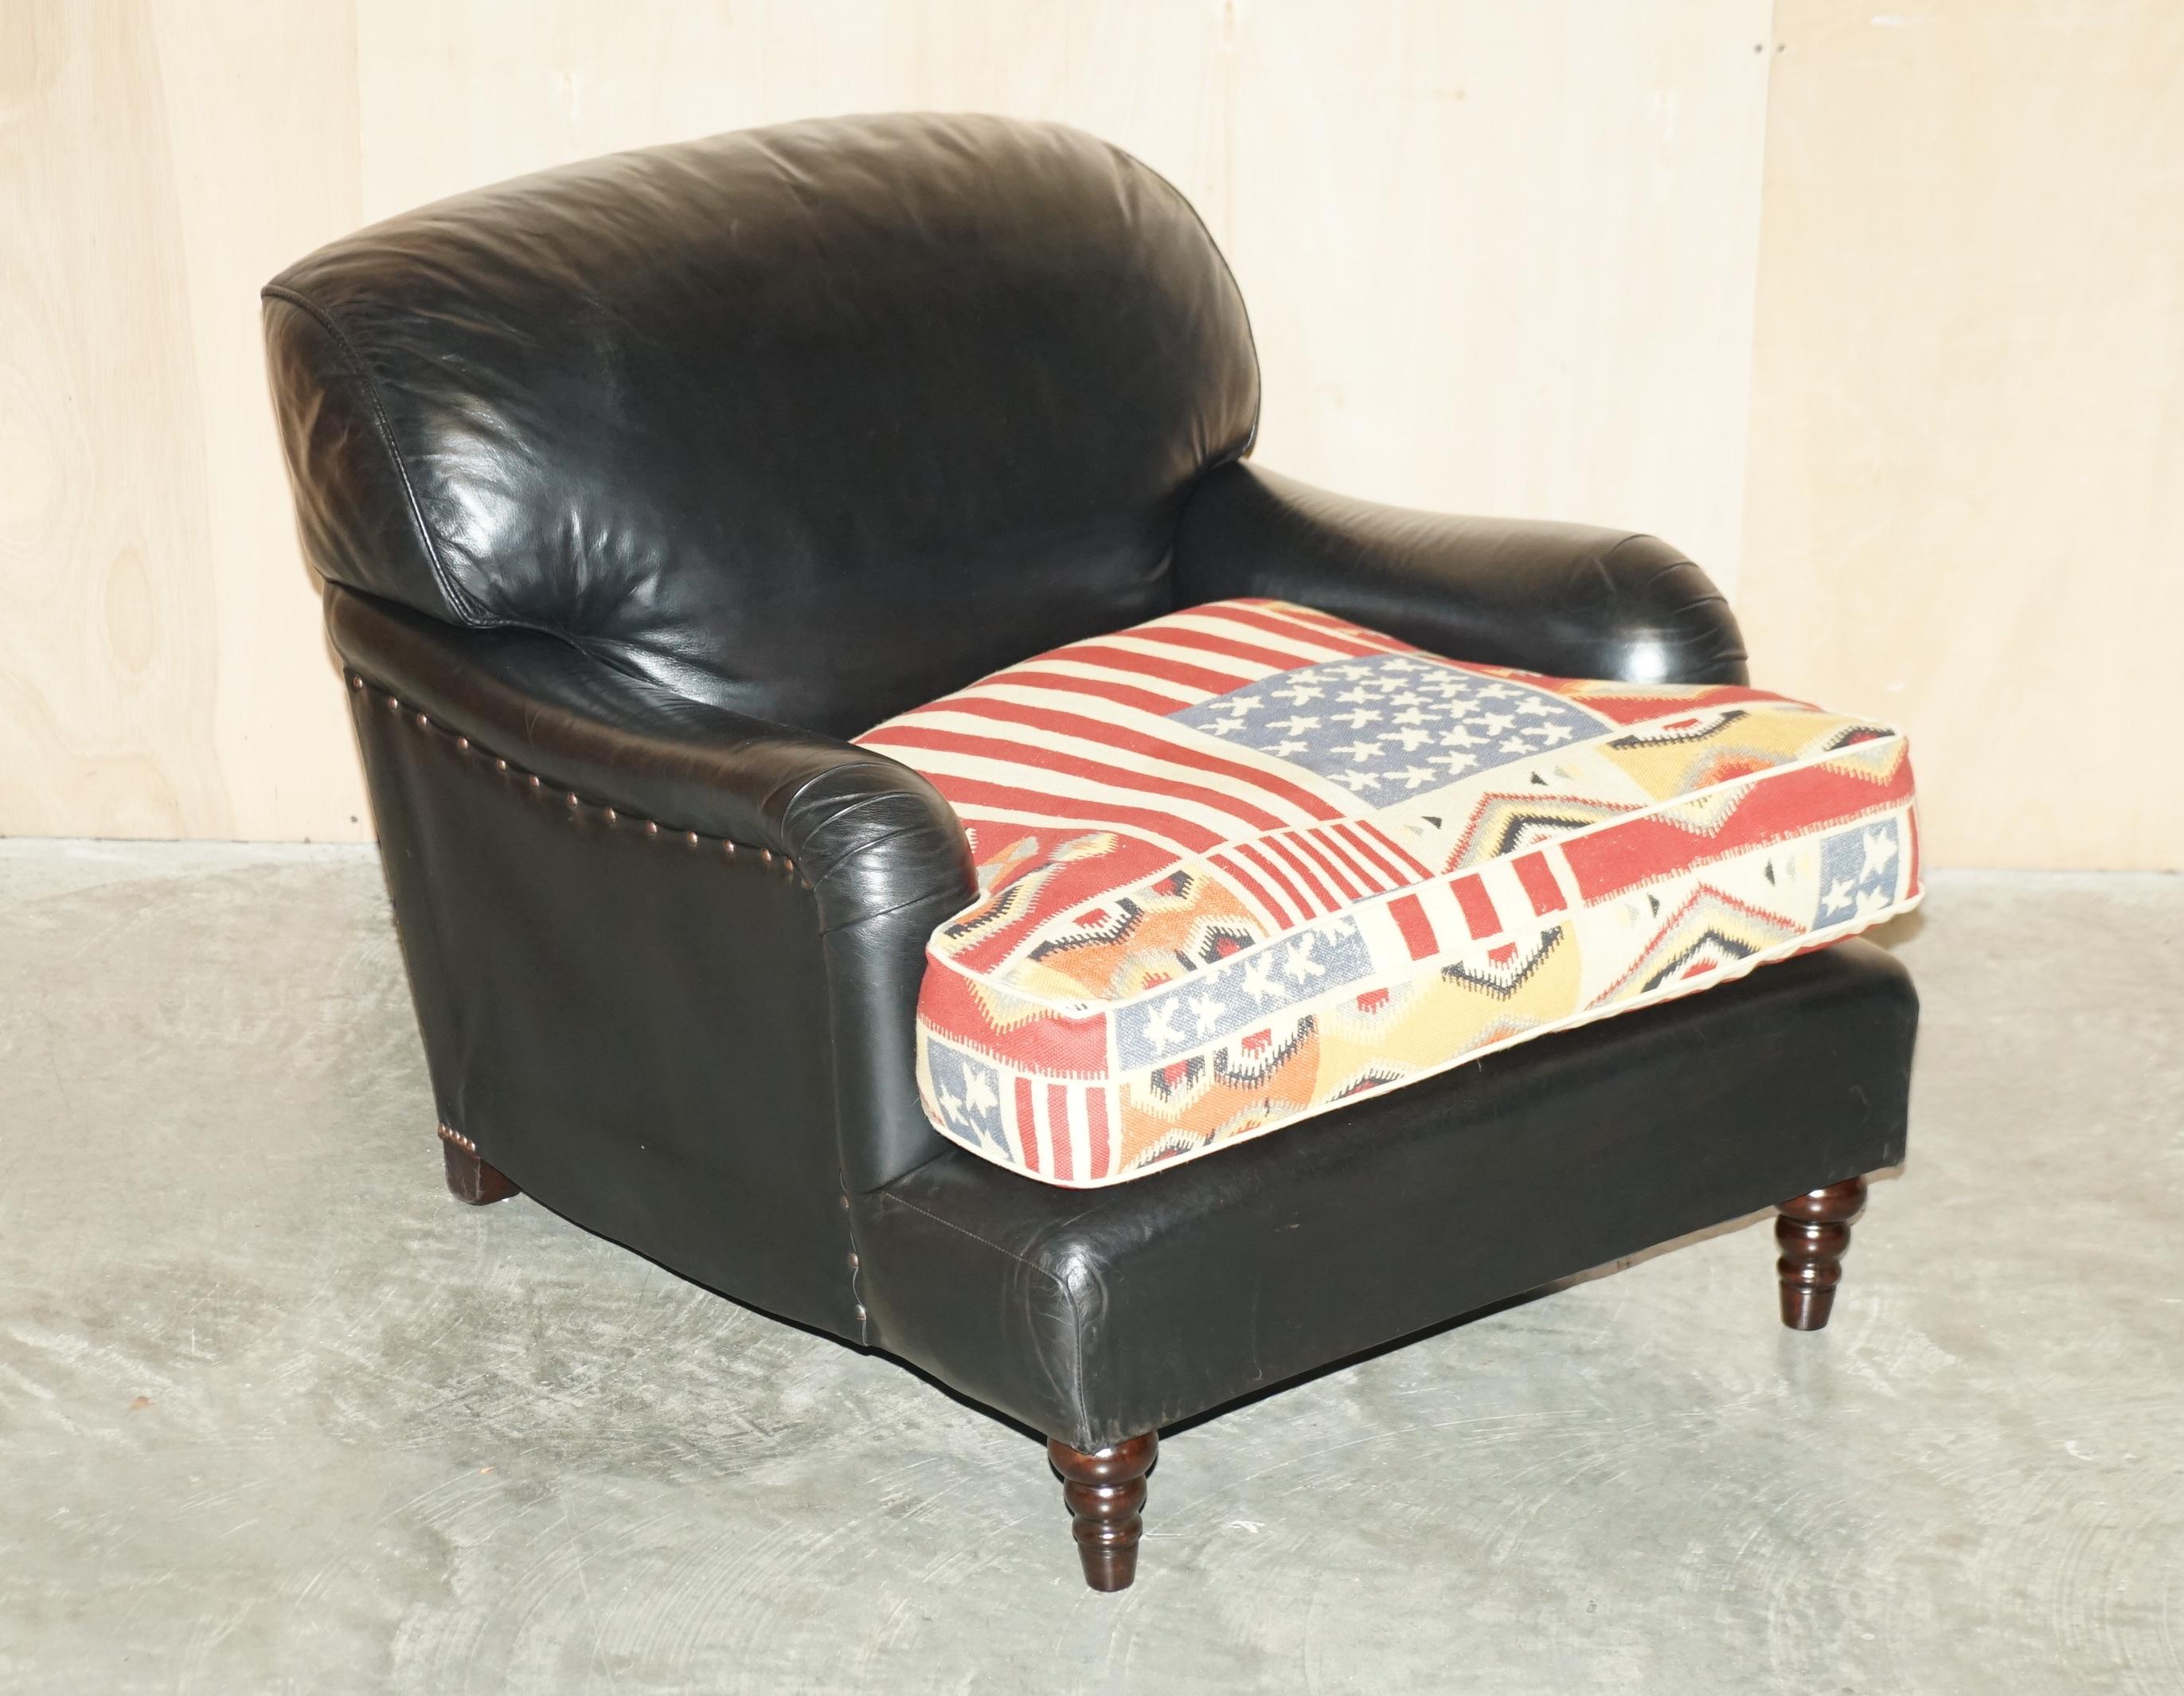 We are delighted to offer for sale this hand made in England, George Smith Signature Standard arm style armchair with American flag Kilim seat cushion and black leather upholstery.

A very good looking well made armchair, based on the original